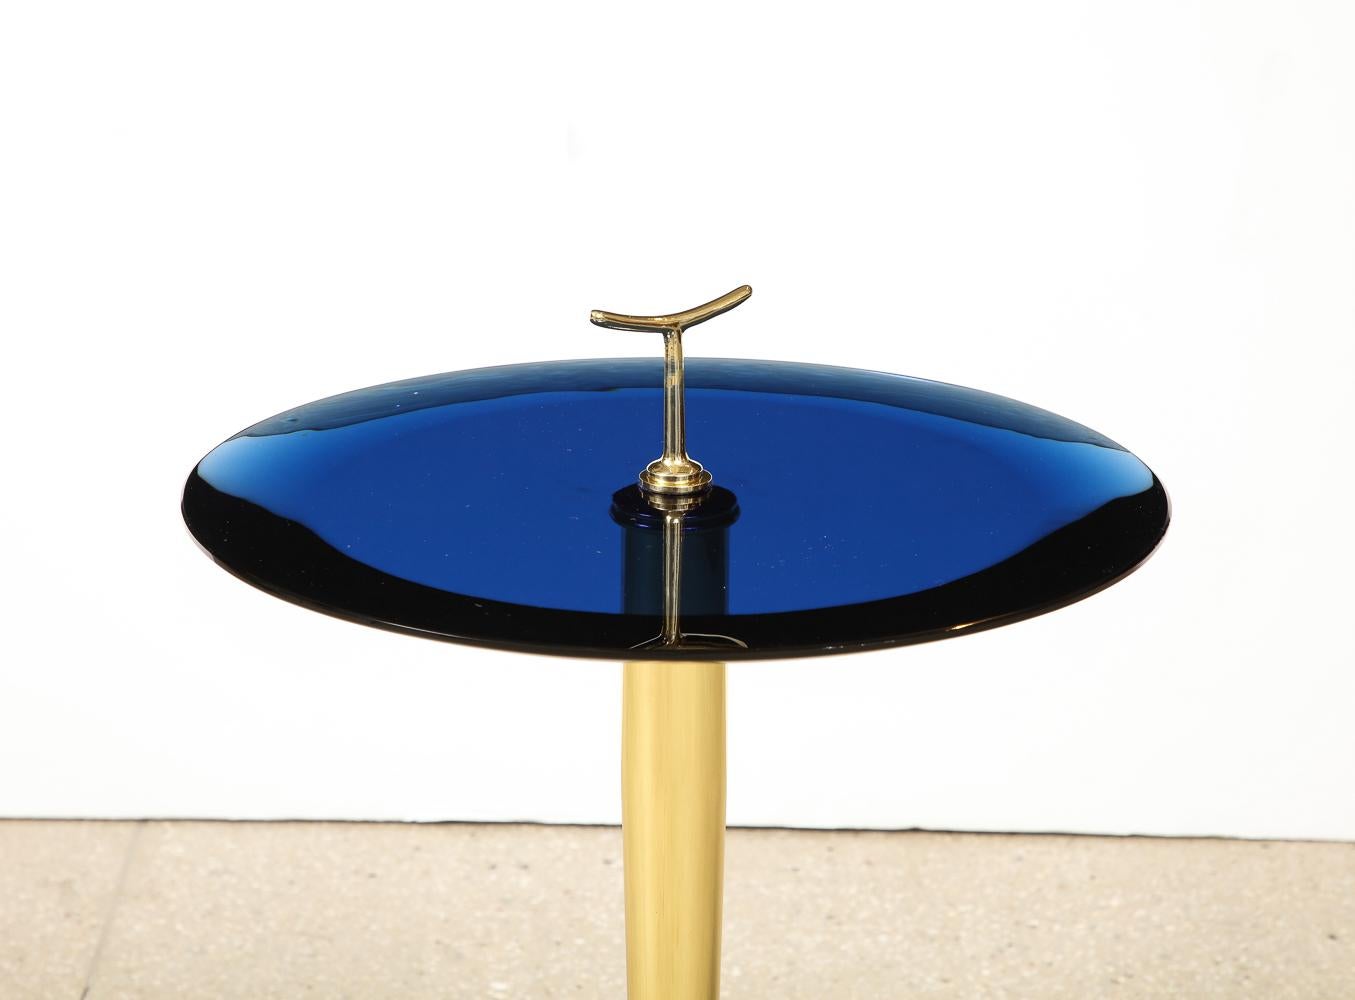 Polished brass, colored glass. Brass frame with 3-pronged foot and stylized finial/handle. Thick, circular blue glass table surface with elegant beveled edge.